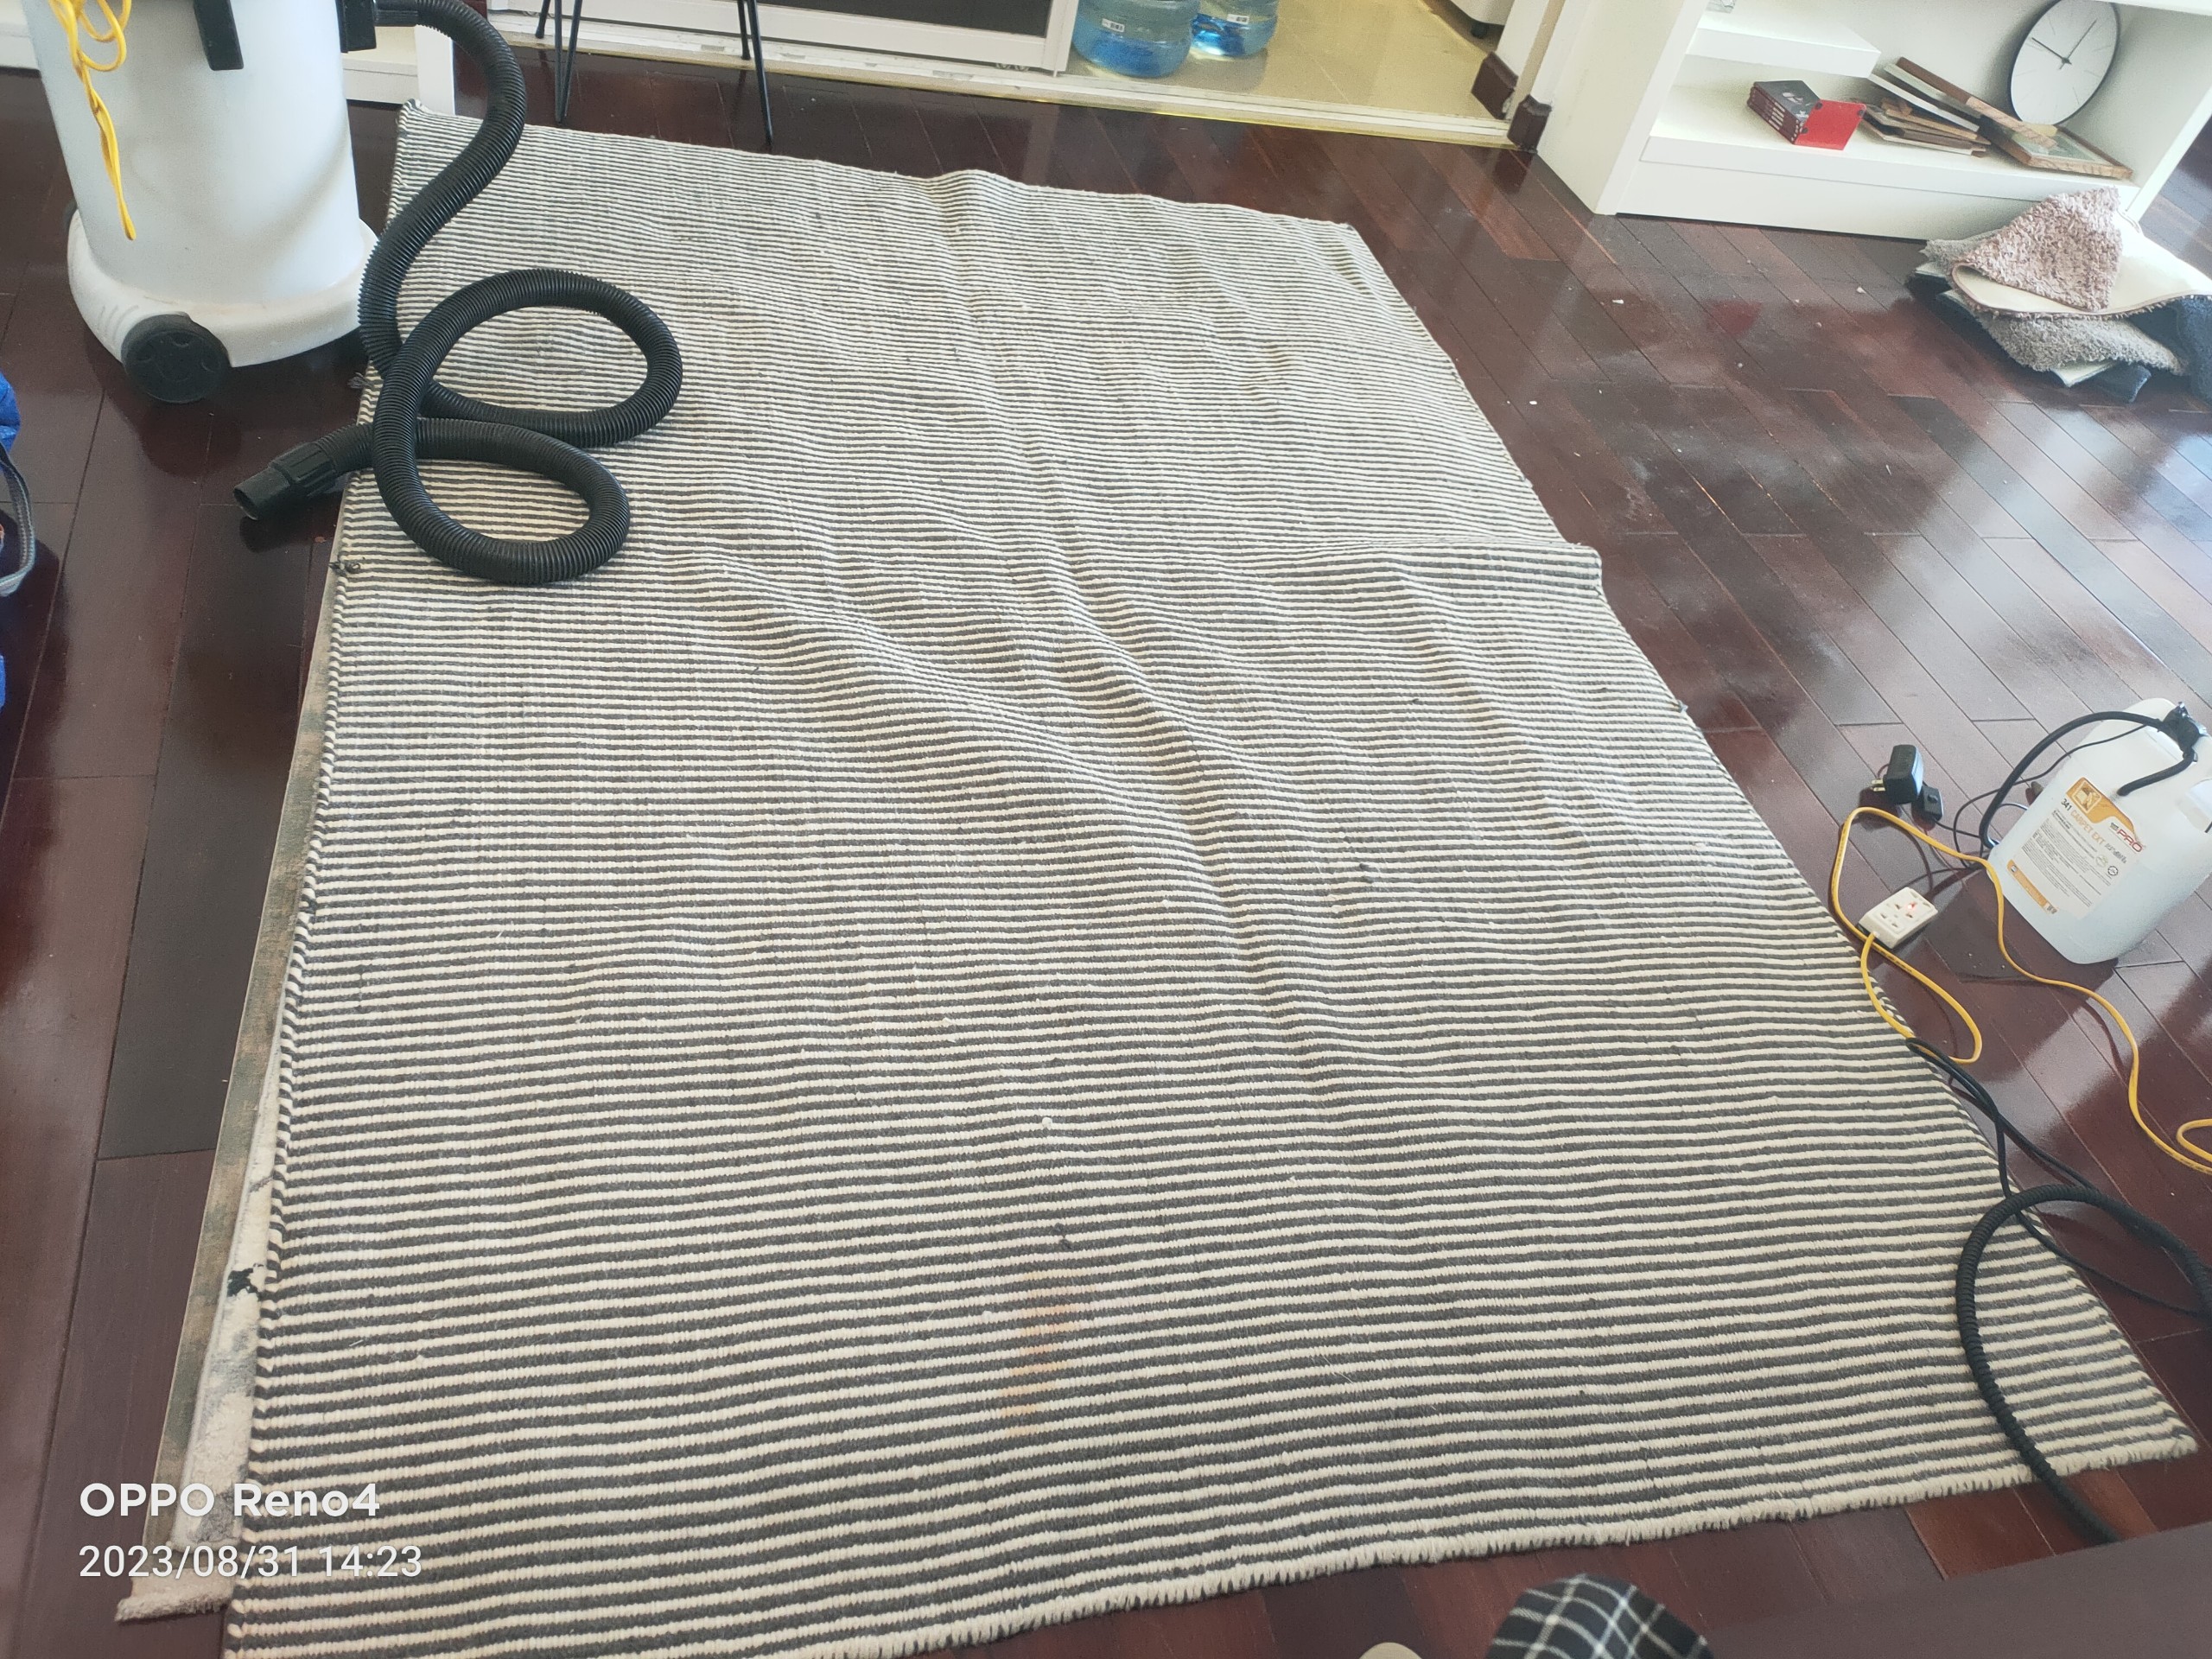 Rug steam cleaning